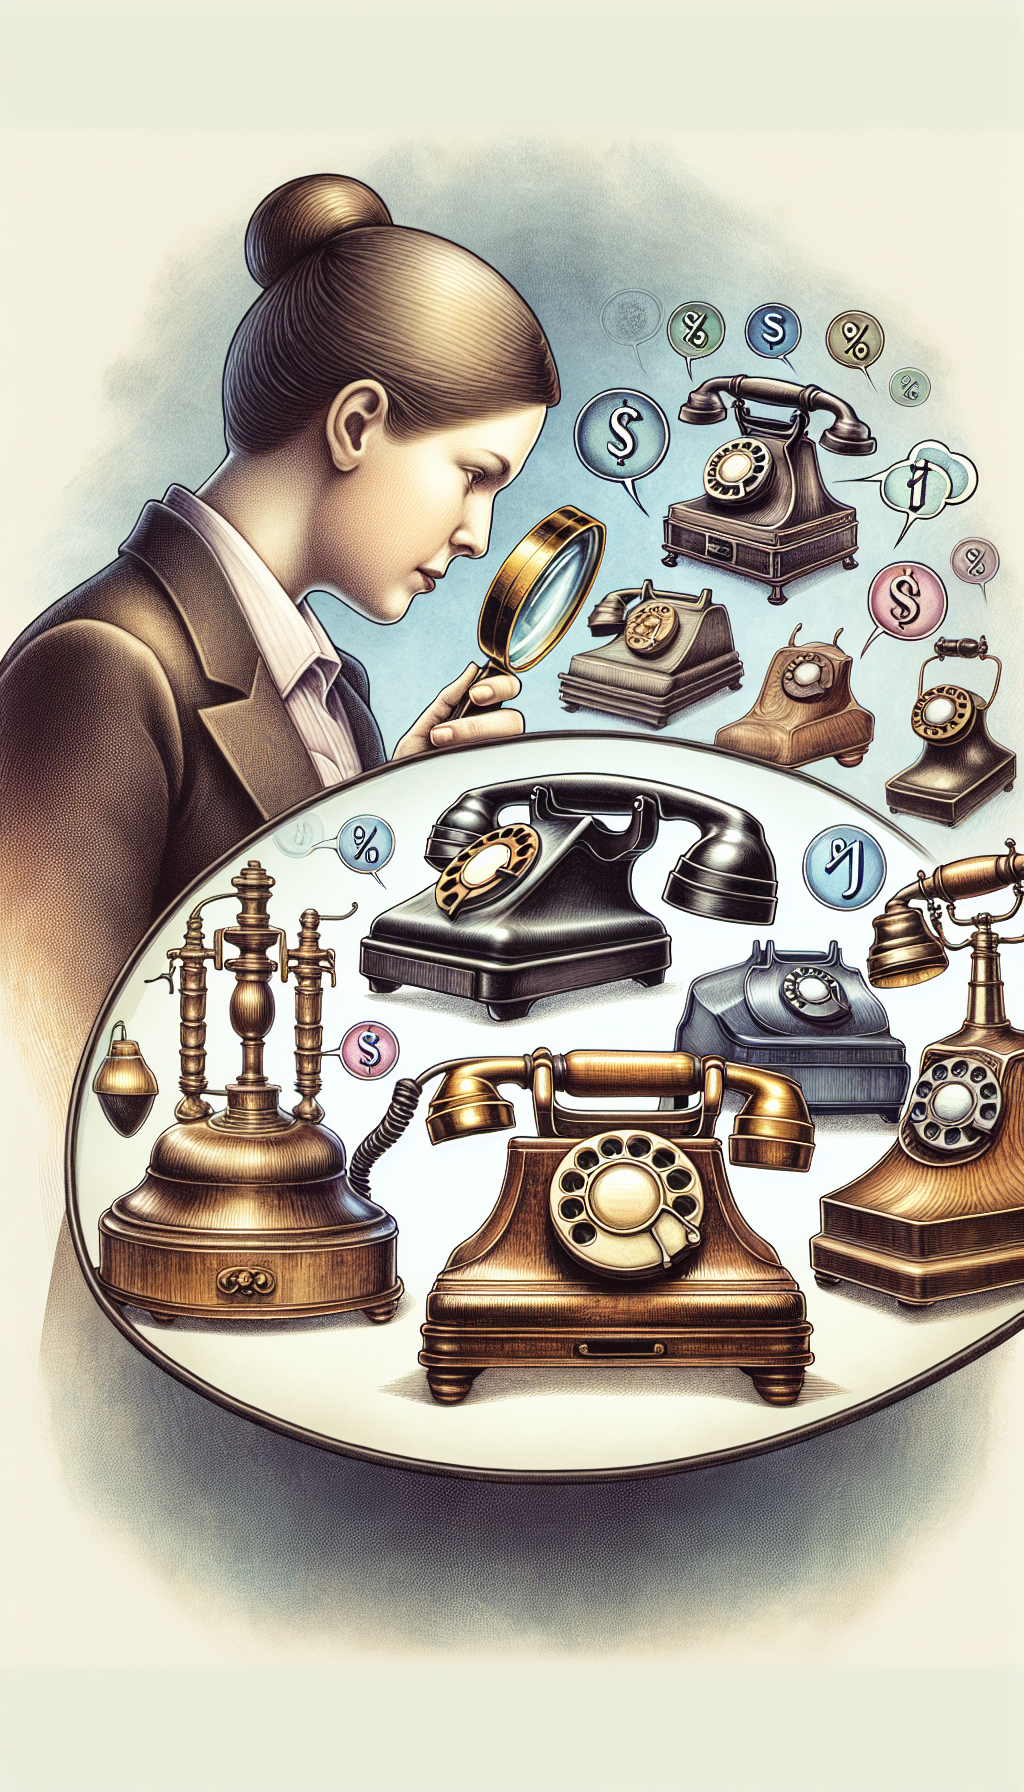 An intricate juxtaposition of an appraiser with a magnifying glass leaning over a diverse collection of antique telephones, each cast in a different artistic style—watercolor, pencil sketch, digital render, and oil painting. The telephones form a circle around a thought bubble filled with reflective symbols ($, %, ?), representing the multifaceted considerations in valuating historical conversation pieces.